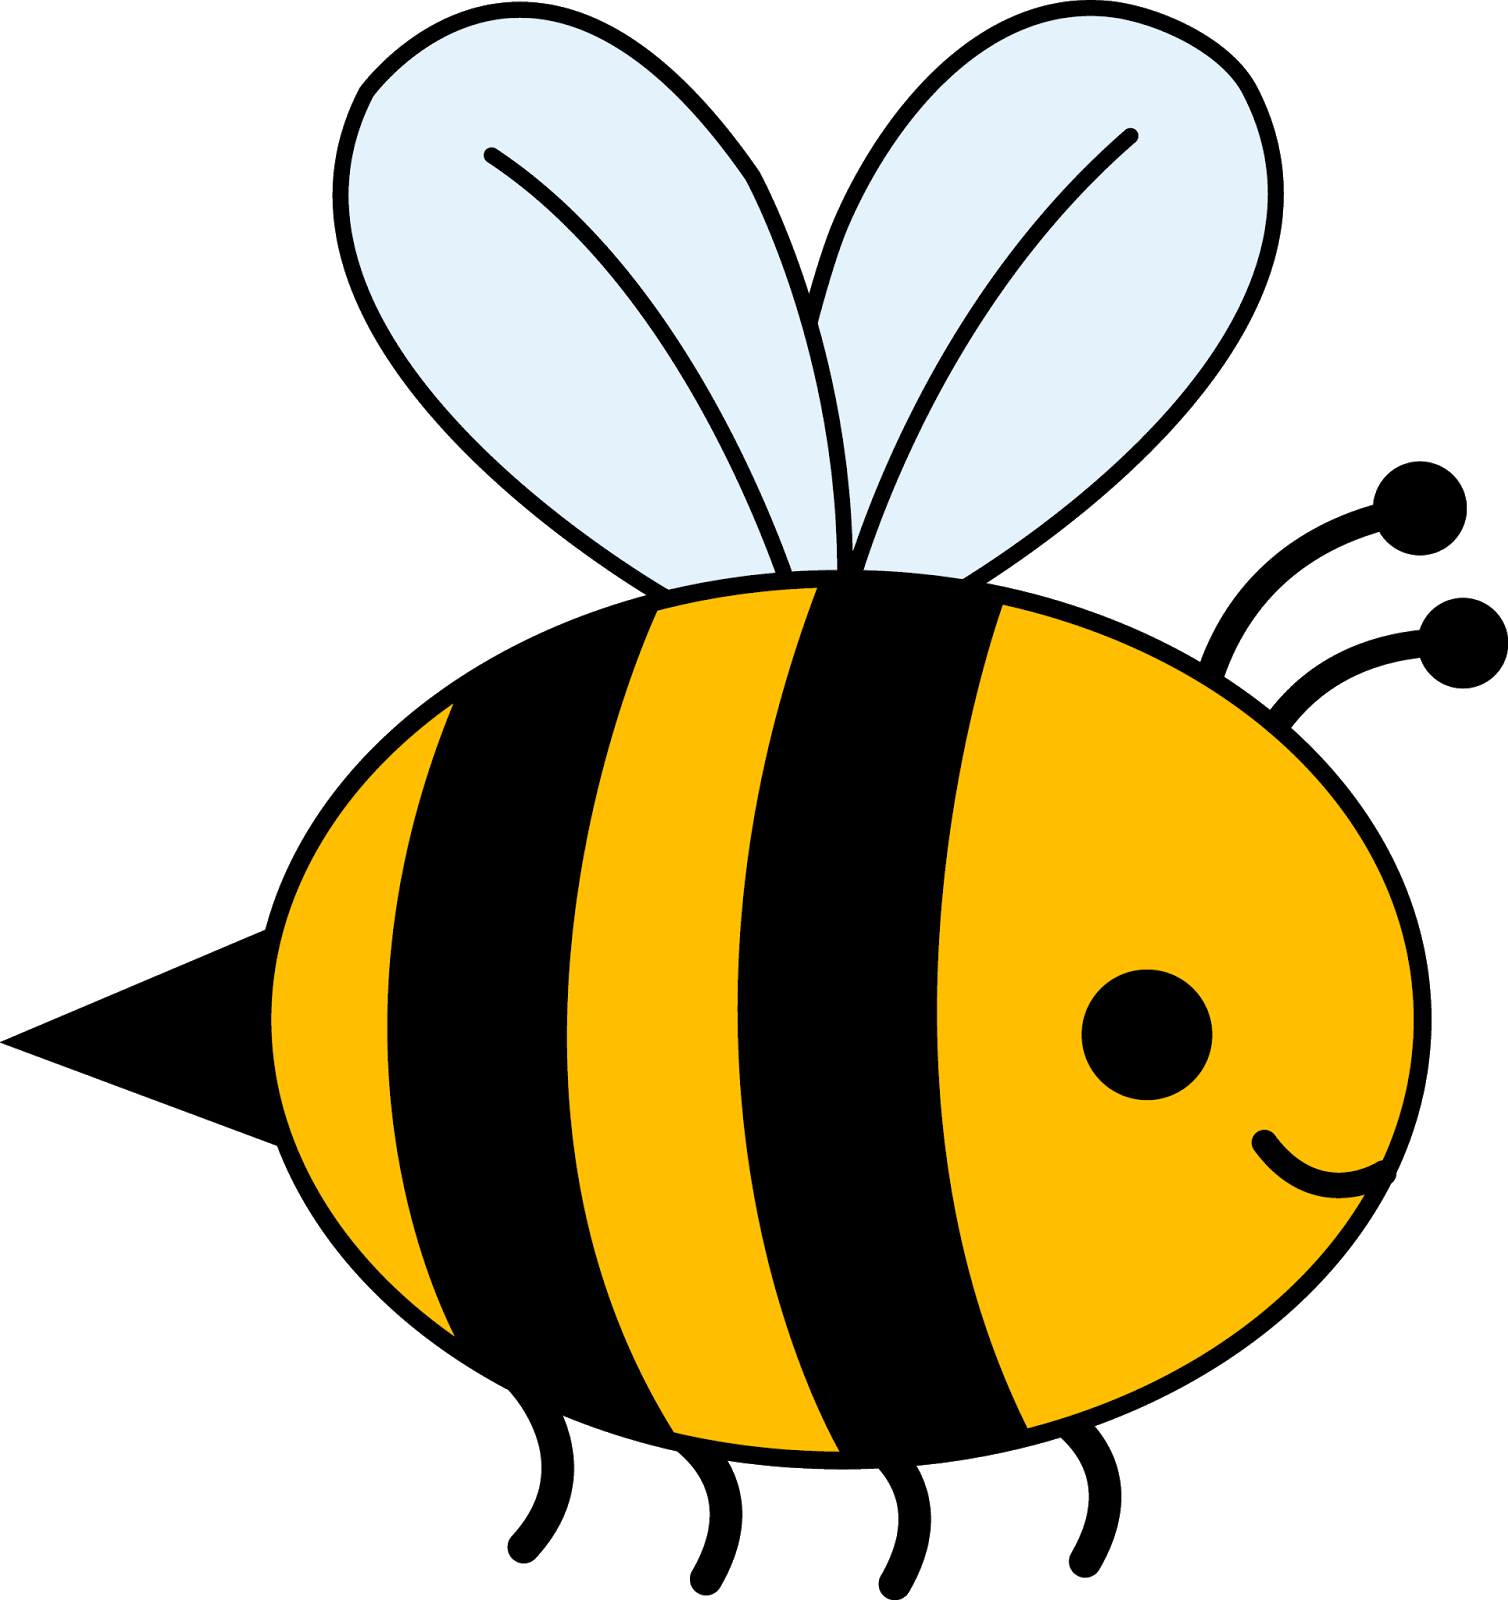 Bee clipart black and white free clipart images 